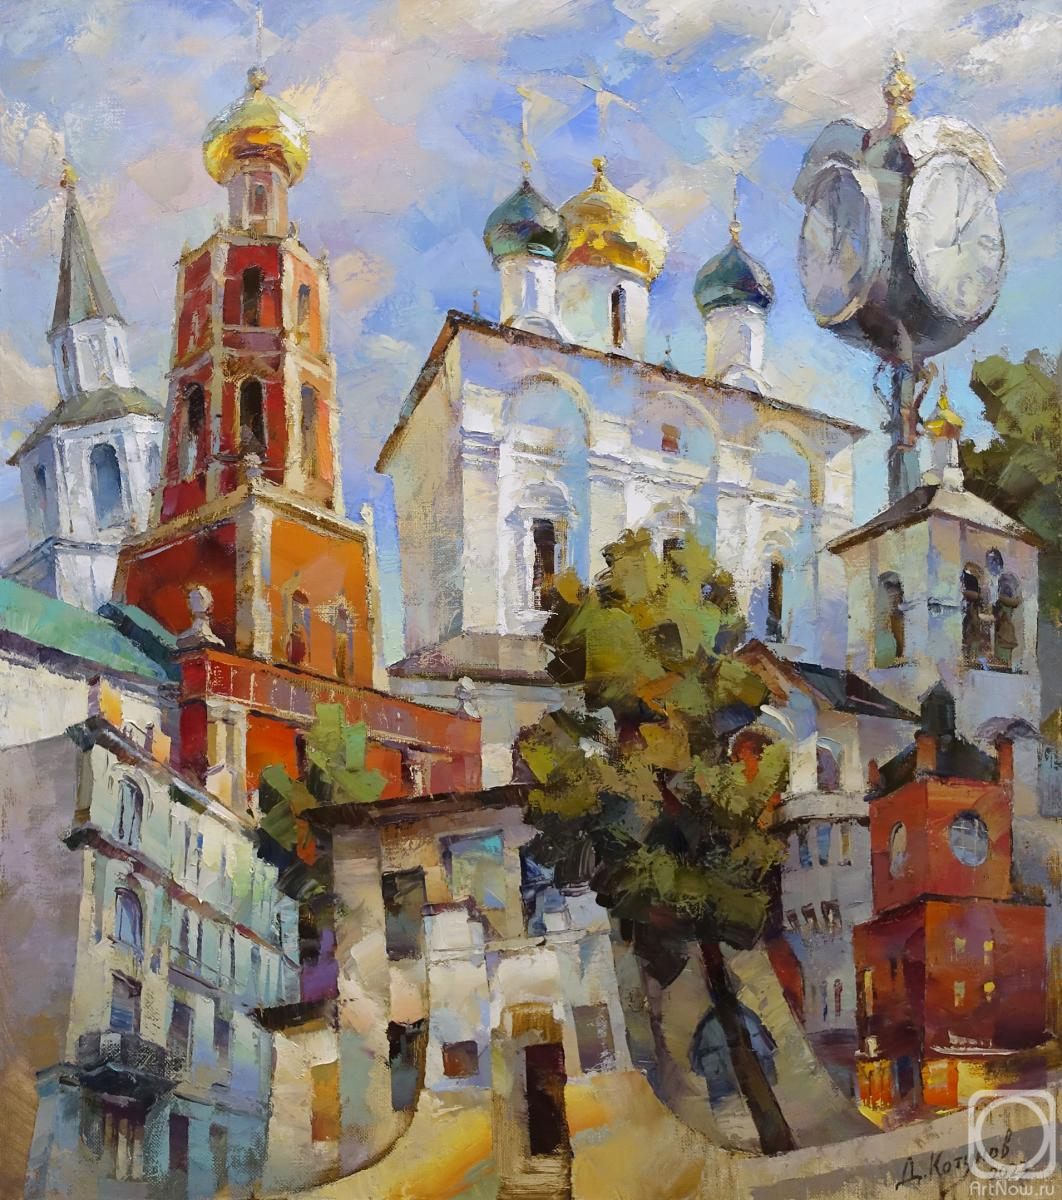 Kotunov Dmitry. Travel from St. Petersburg to Moscow